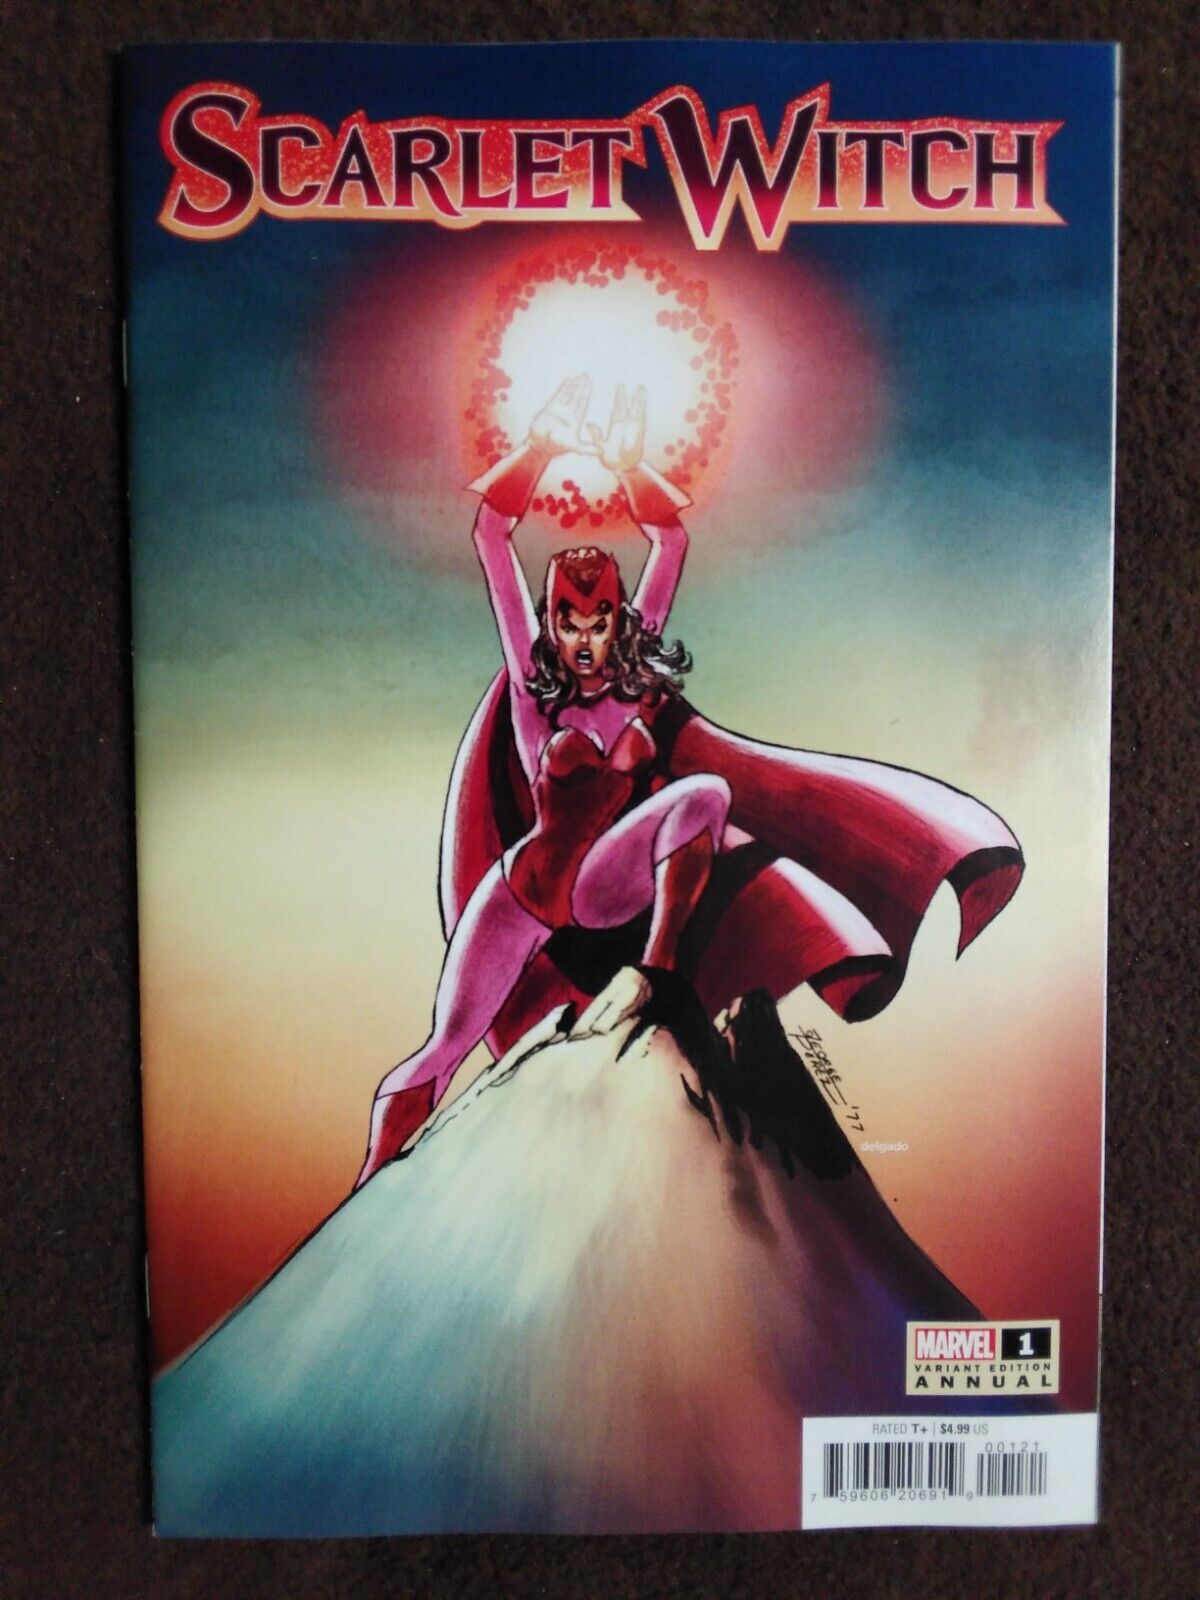 SCARLET WITCH #6-10 and ANNDUL #1 NEW 2023 MARVEL COMIC SERIES PICK CHOOSE COMIC